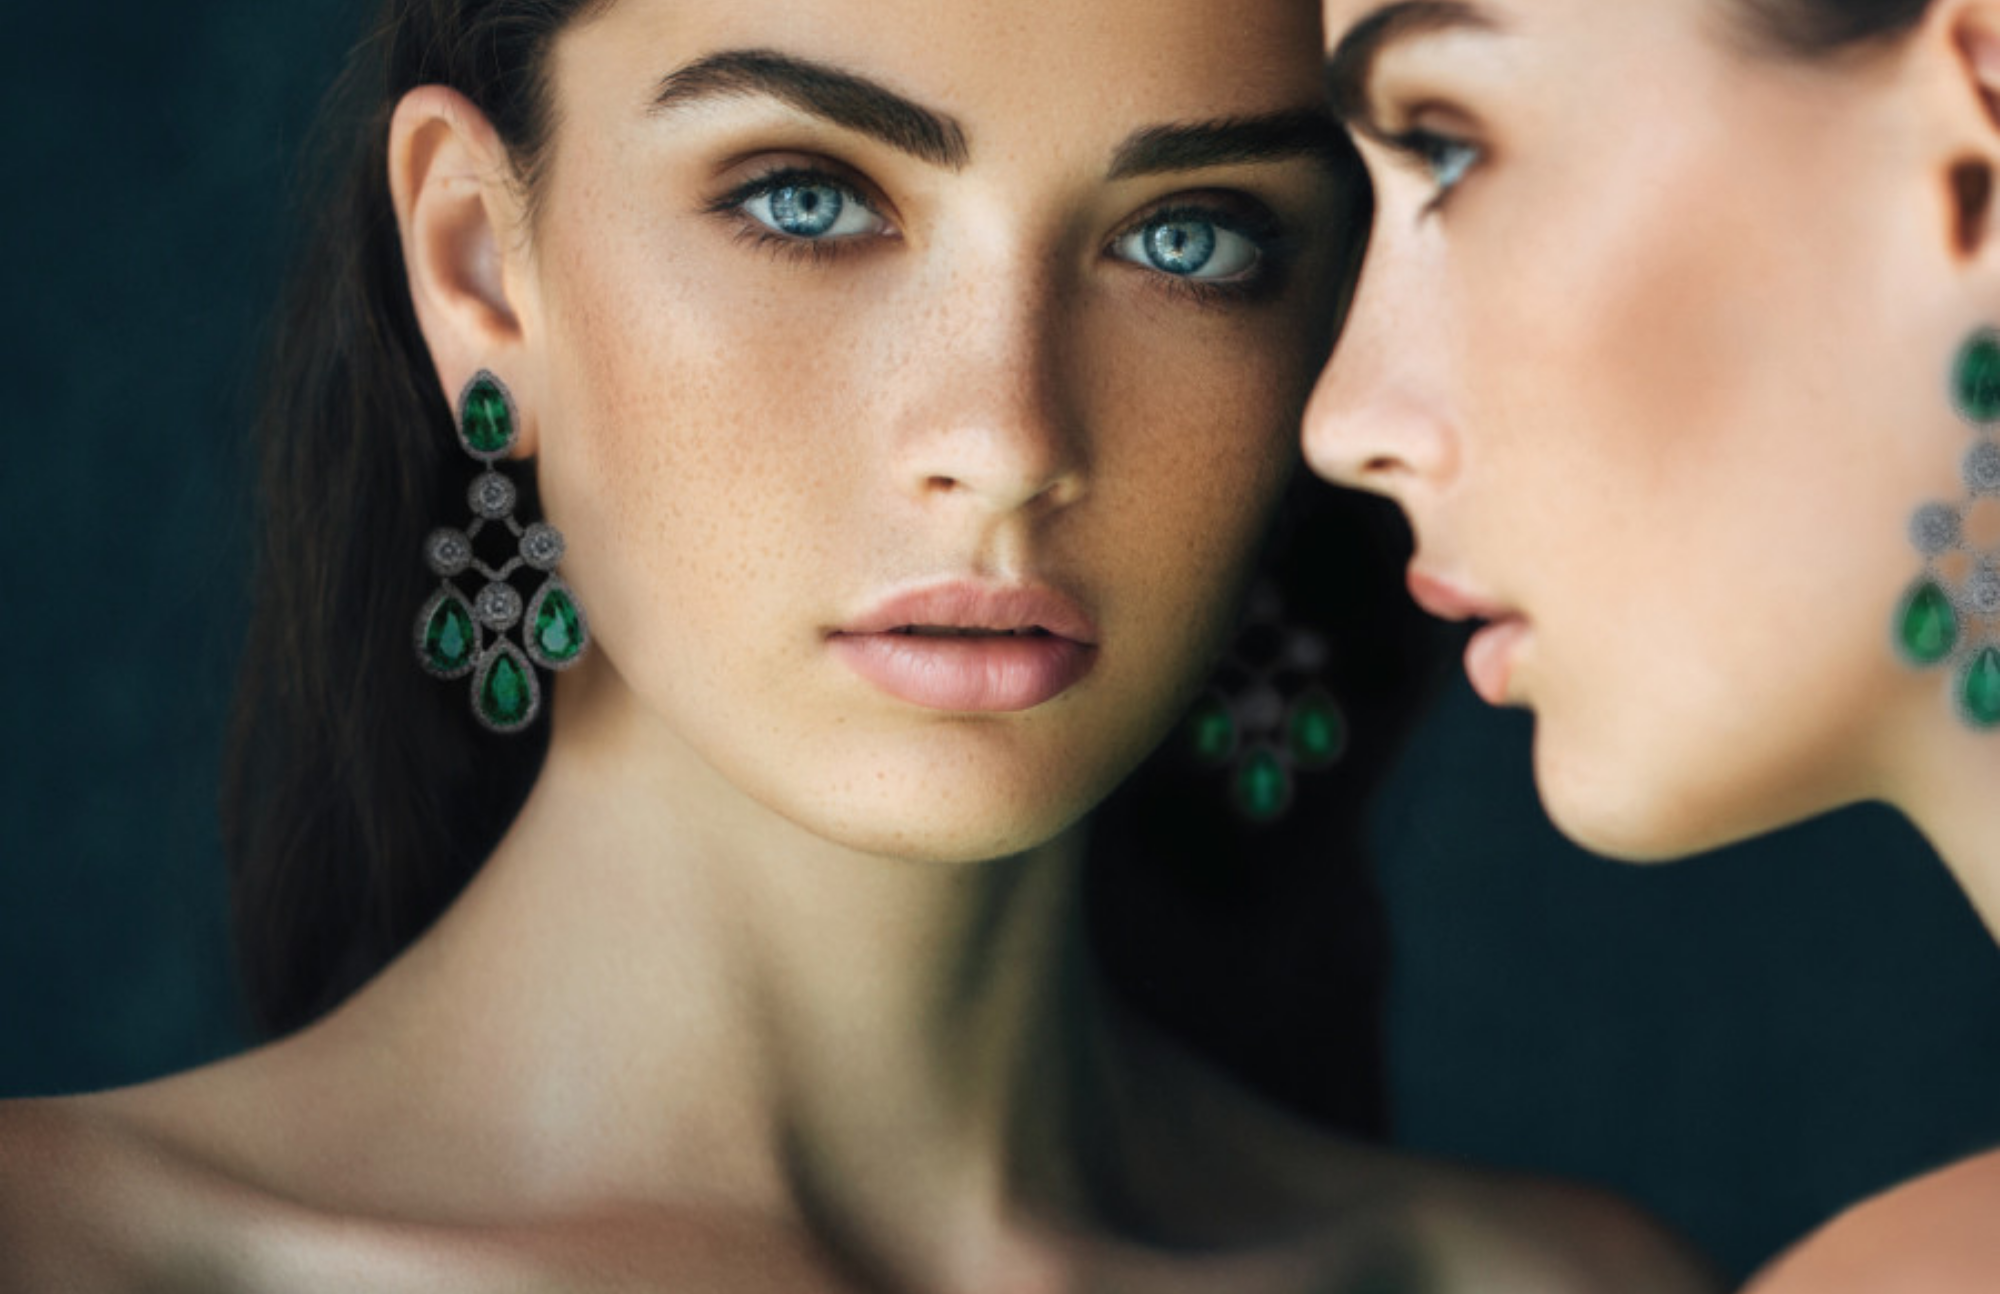 A woman's reflection in a mirror looking directly at the camera while wearing an emerald earring